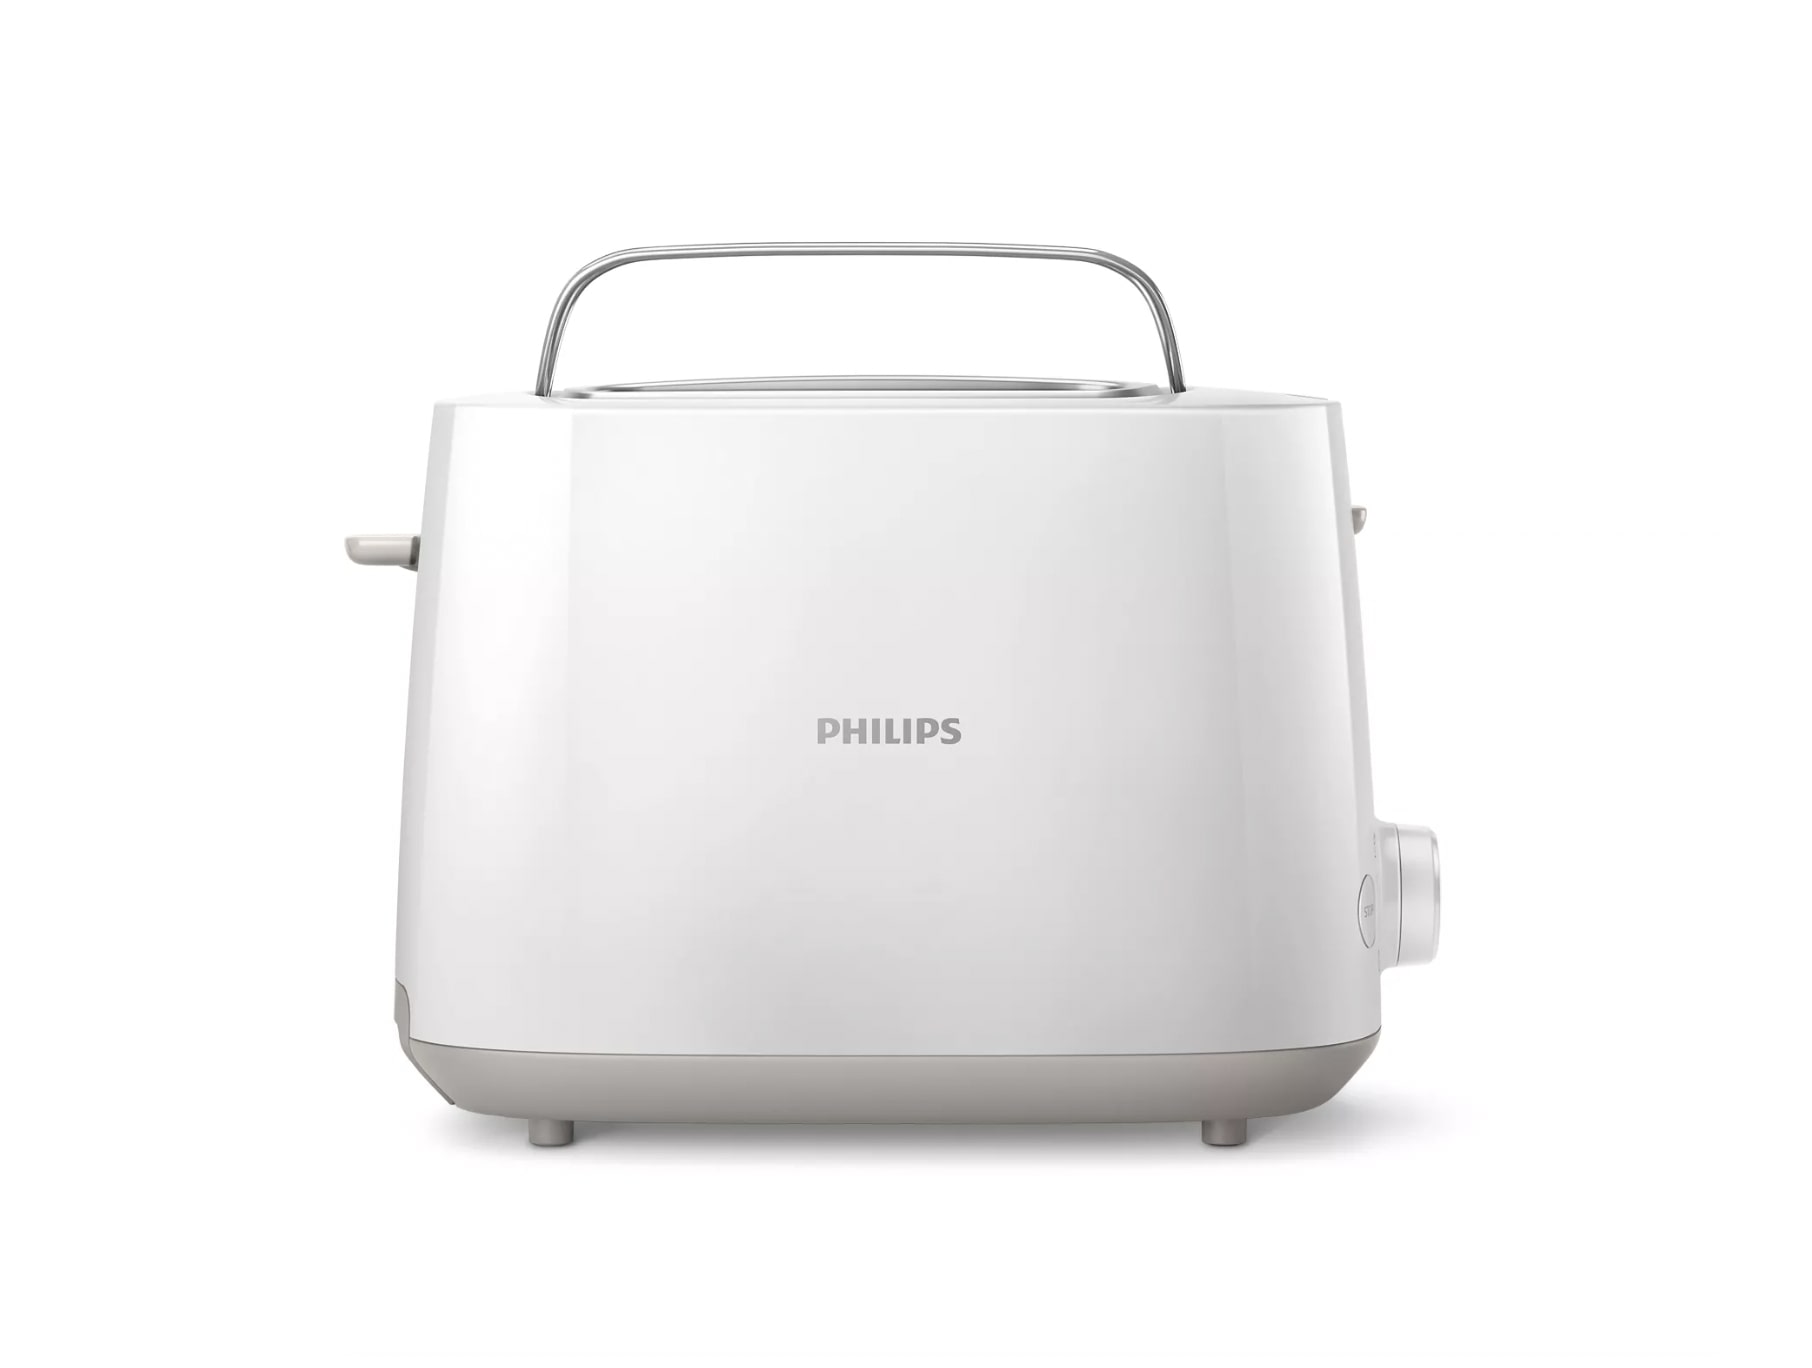 PHILIPS PDHD2581/00 grille-pain